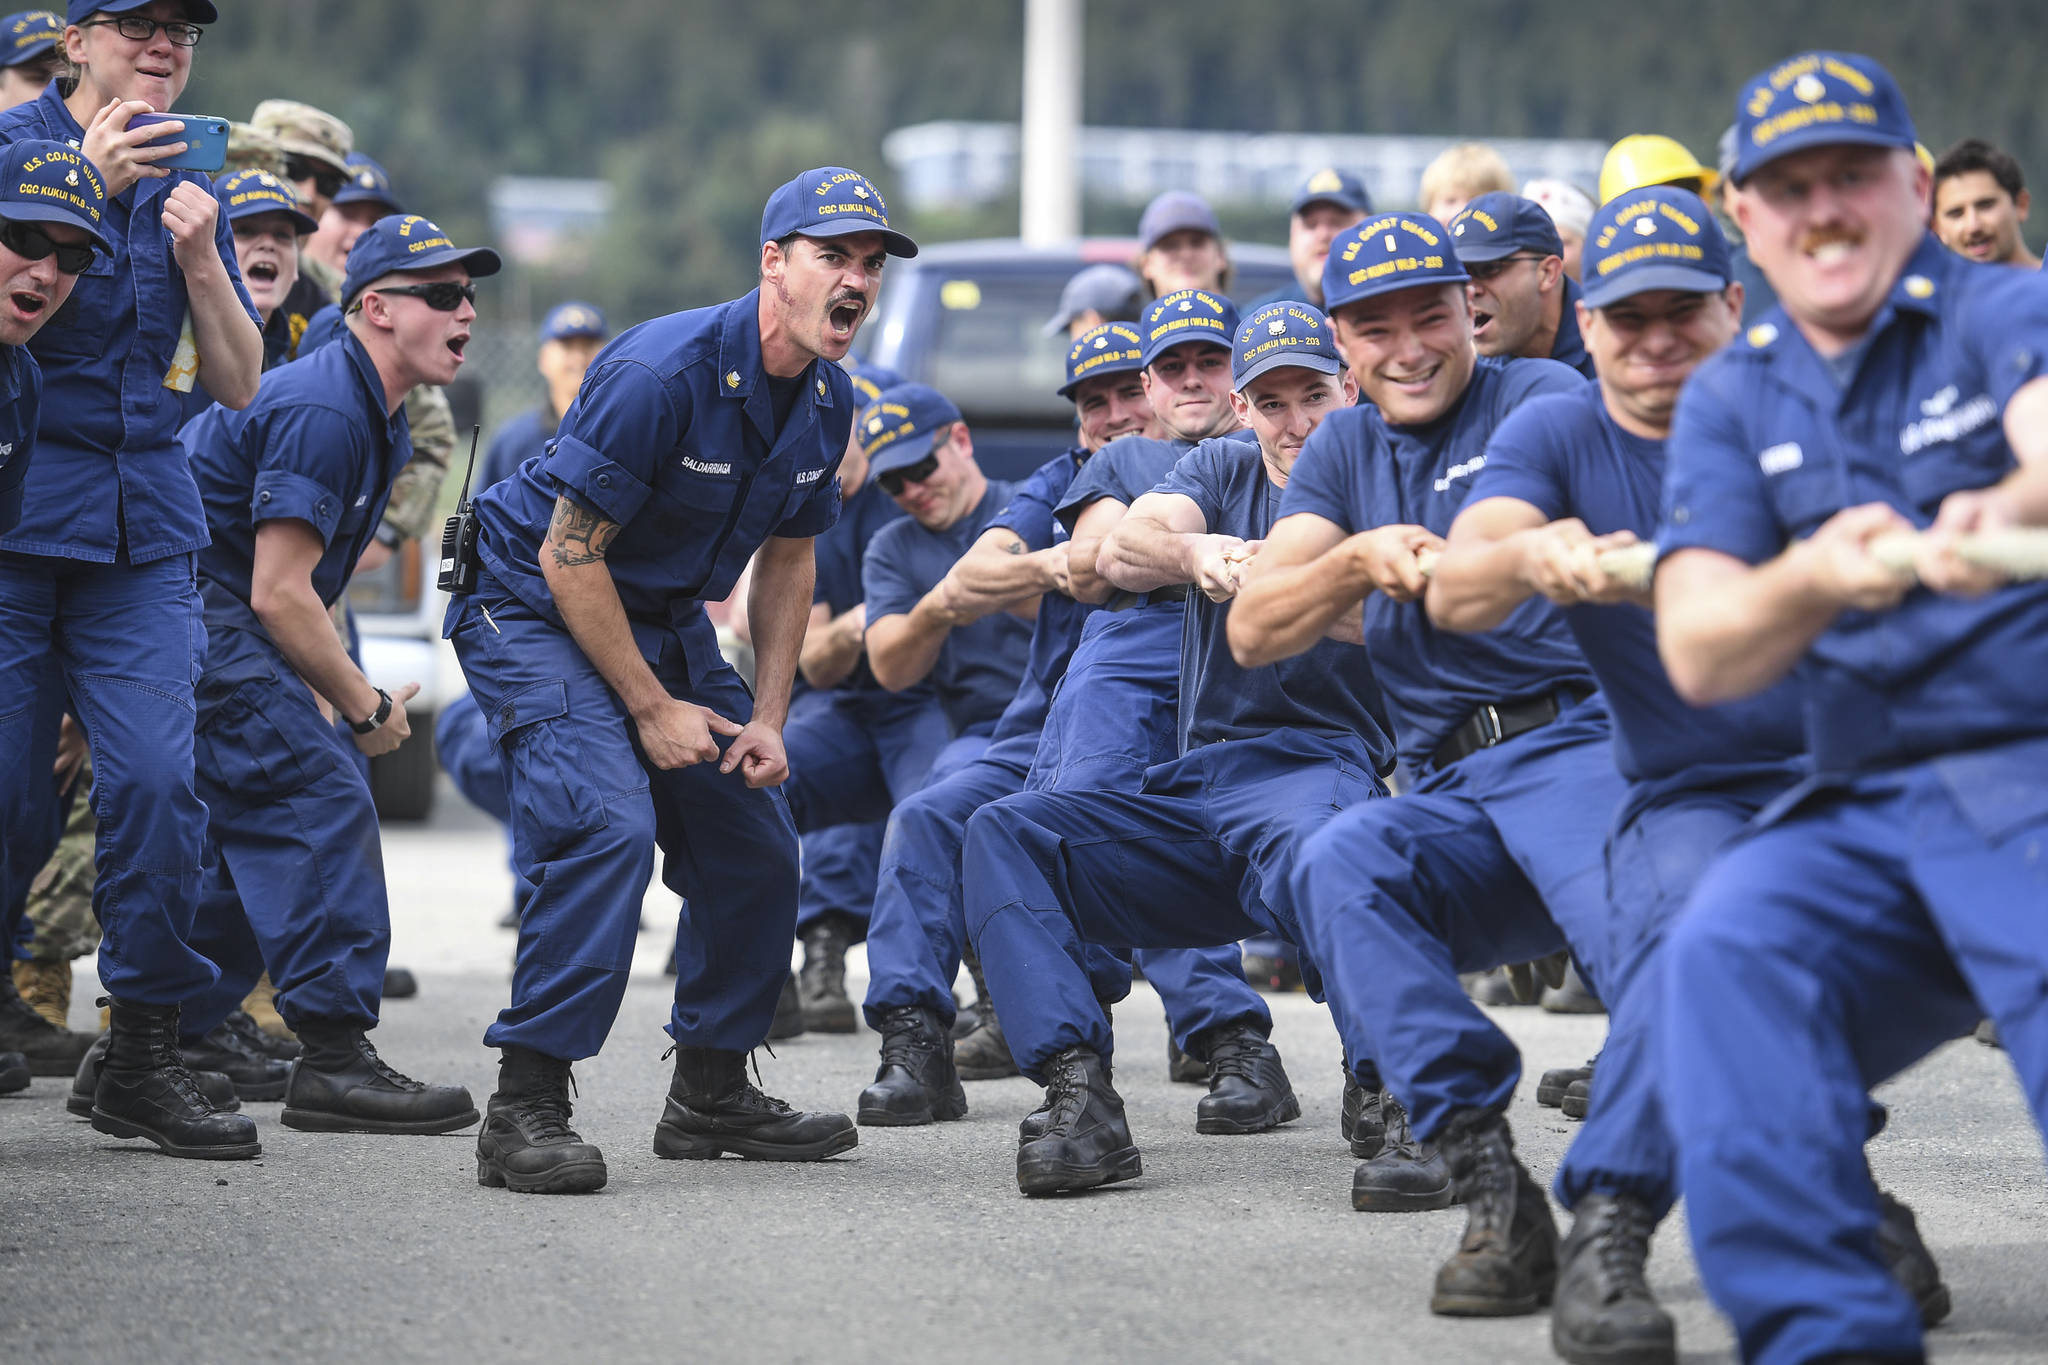 Marcos Saldarriaga, of the U.S. Coast Guard Cutter Kukui, center, shouts encouragement to his teammates as they compete in a tug of war contest during the annual Buoy Tender Olympics at Station Juneau on Wednesday, Aug. 21, 2019. (Michael Penn | Juneau Empire)